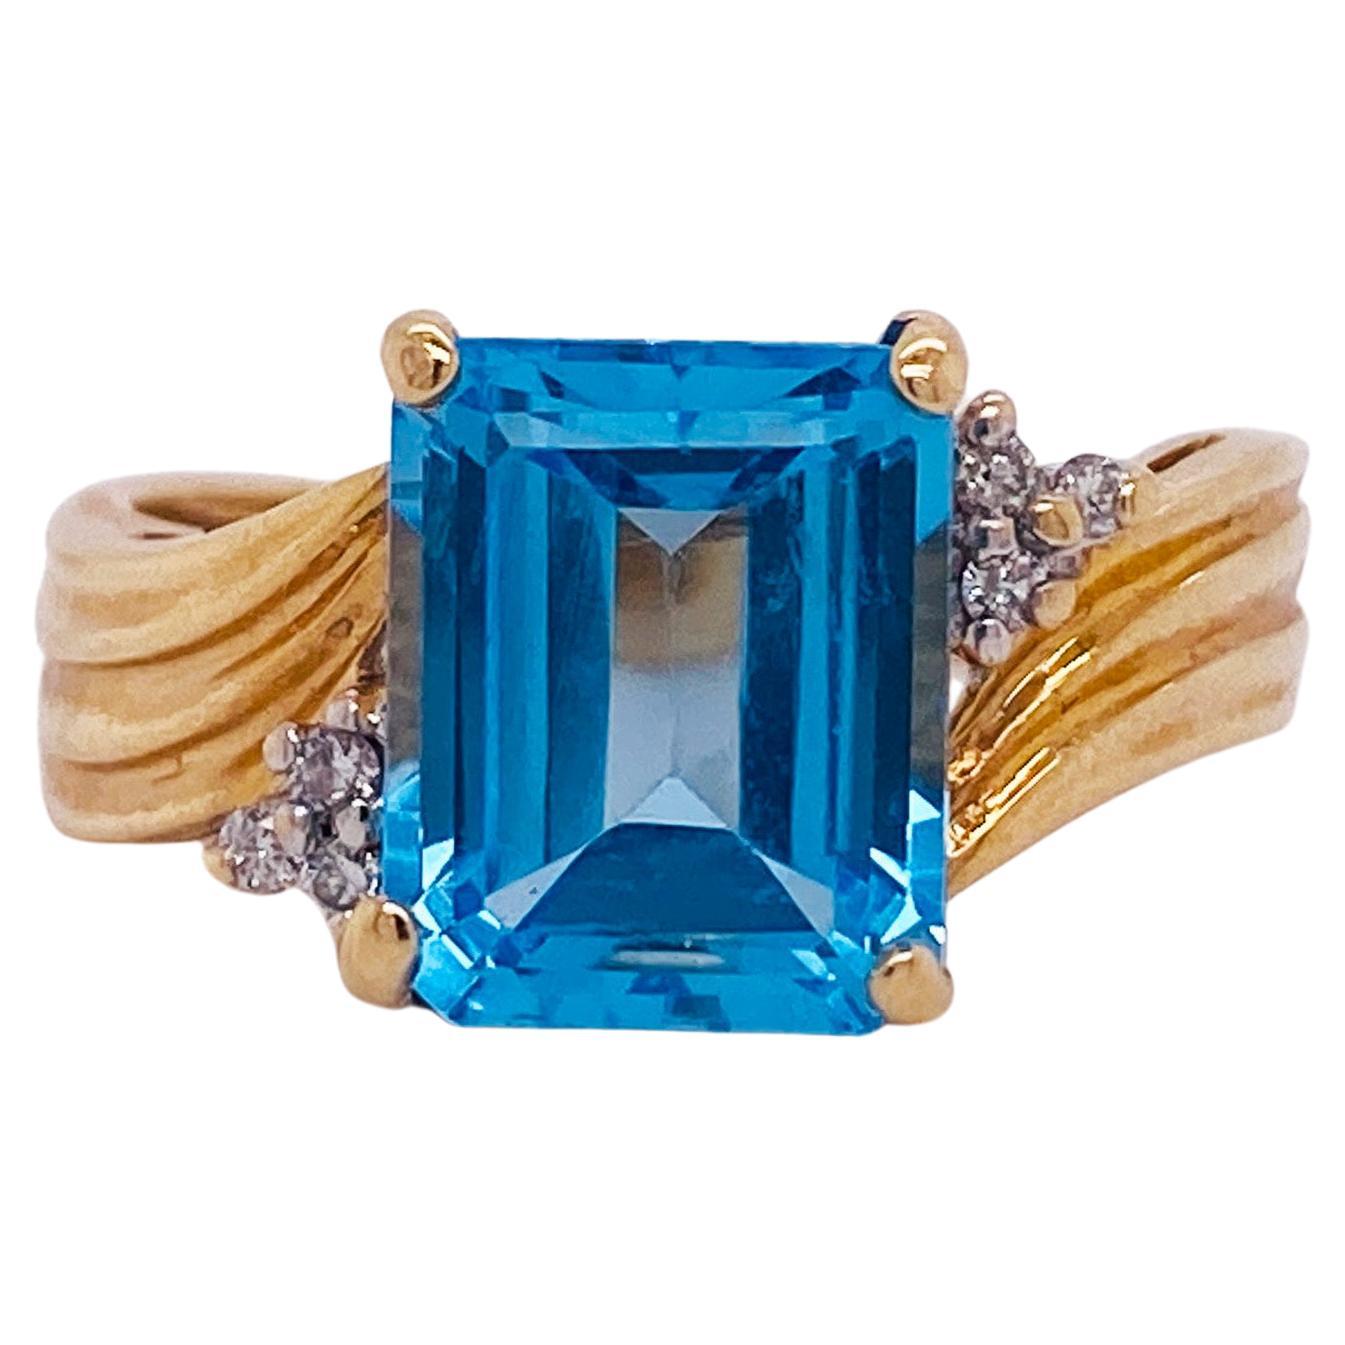 2.05 Carat Bright Ocean Blue Topaz, 14k Gold Wave Ring with Diamond Accents For Sale